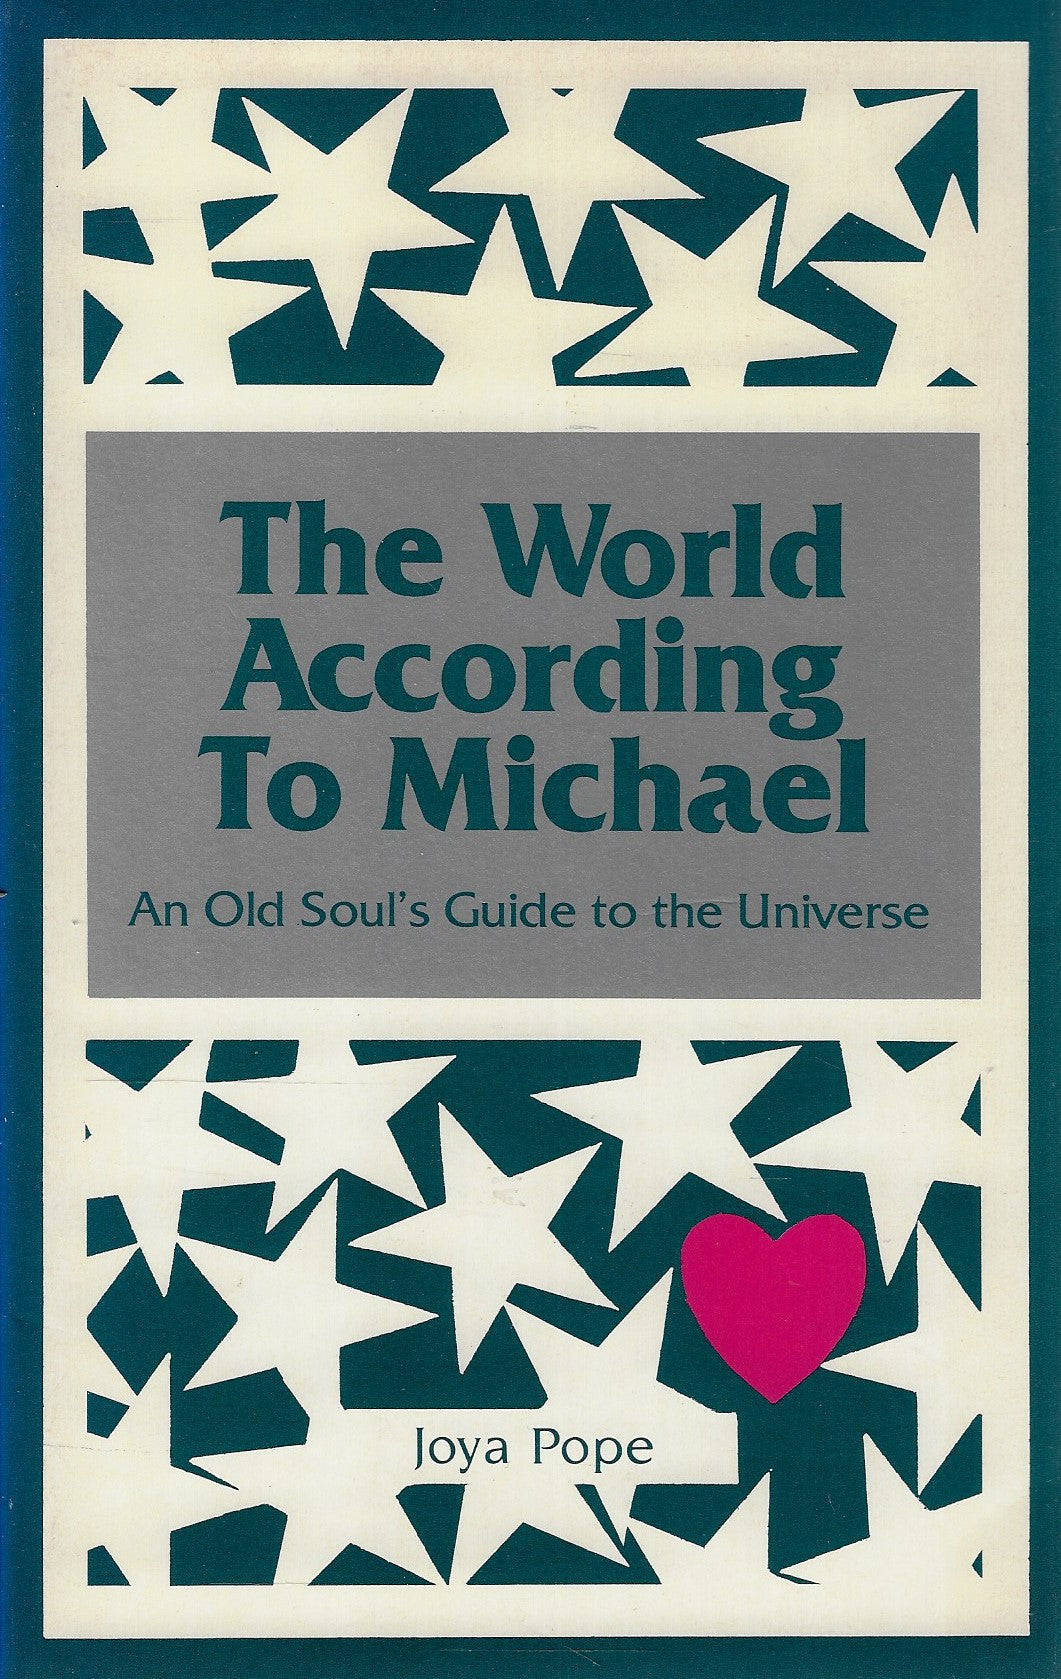 The world according to Michael